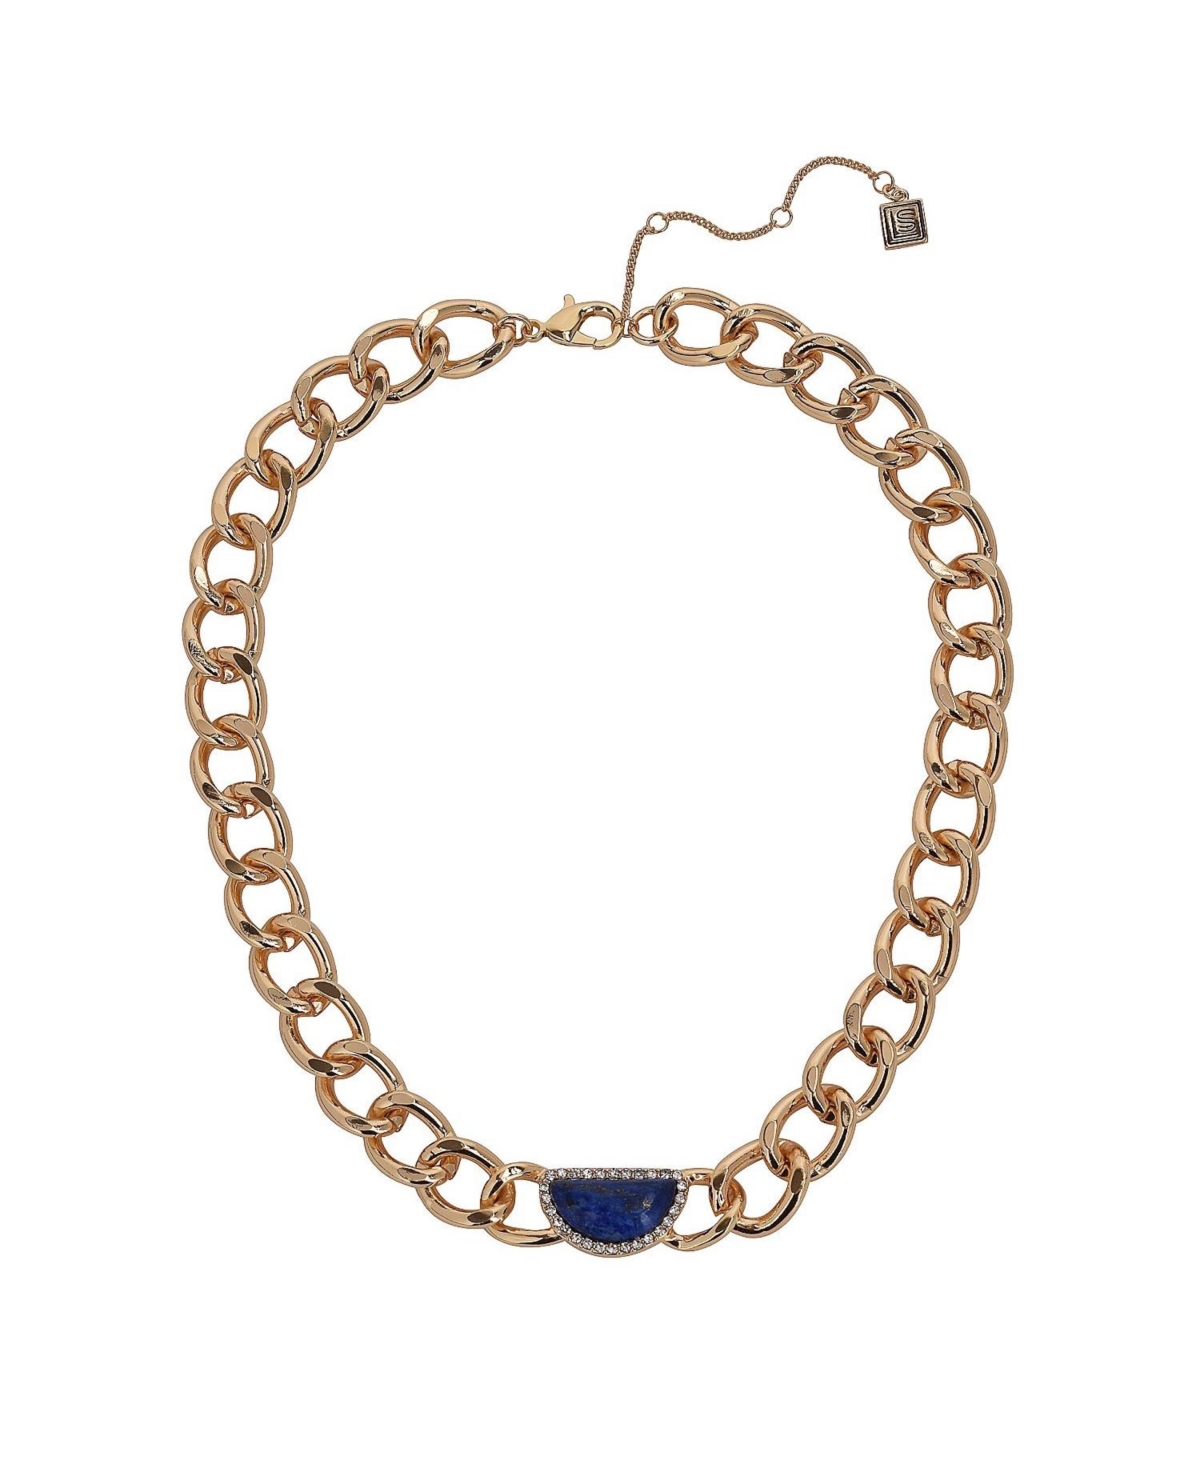 Gold Tone Chain Link Necklace with Blue Center Stones - Blue